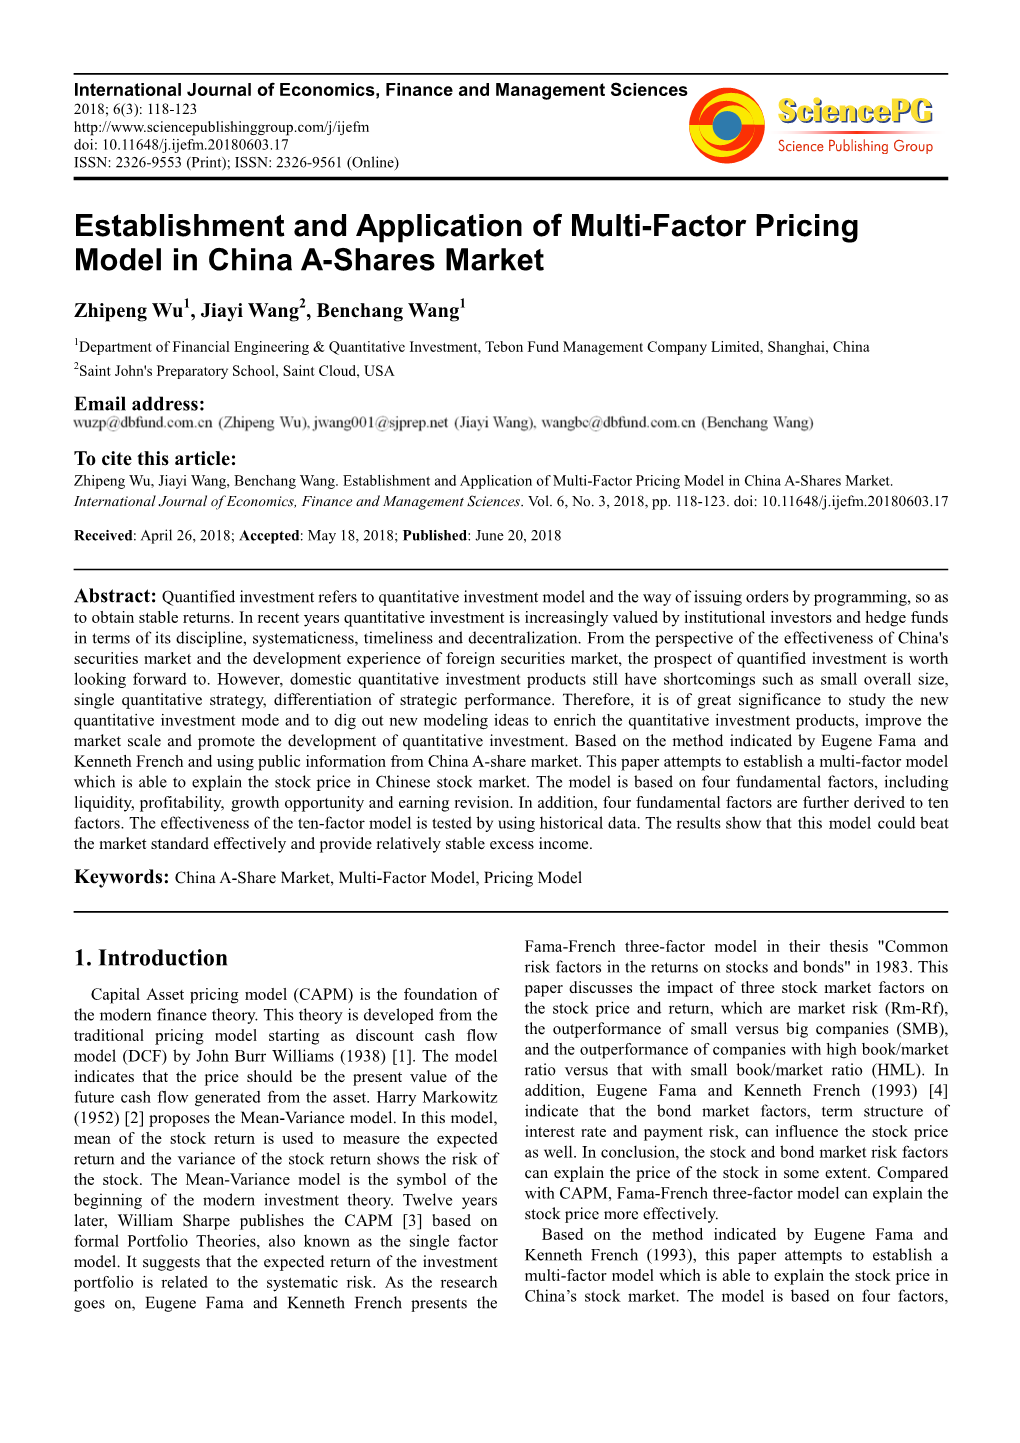 Establishment and Application of Multi-Factor Pricing Model in China A-Shares Market